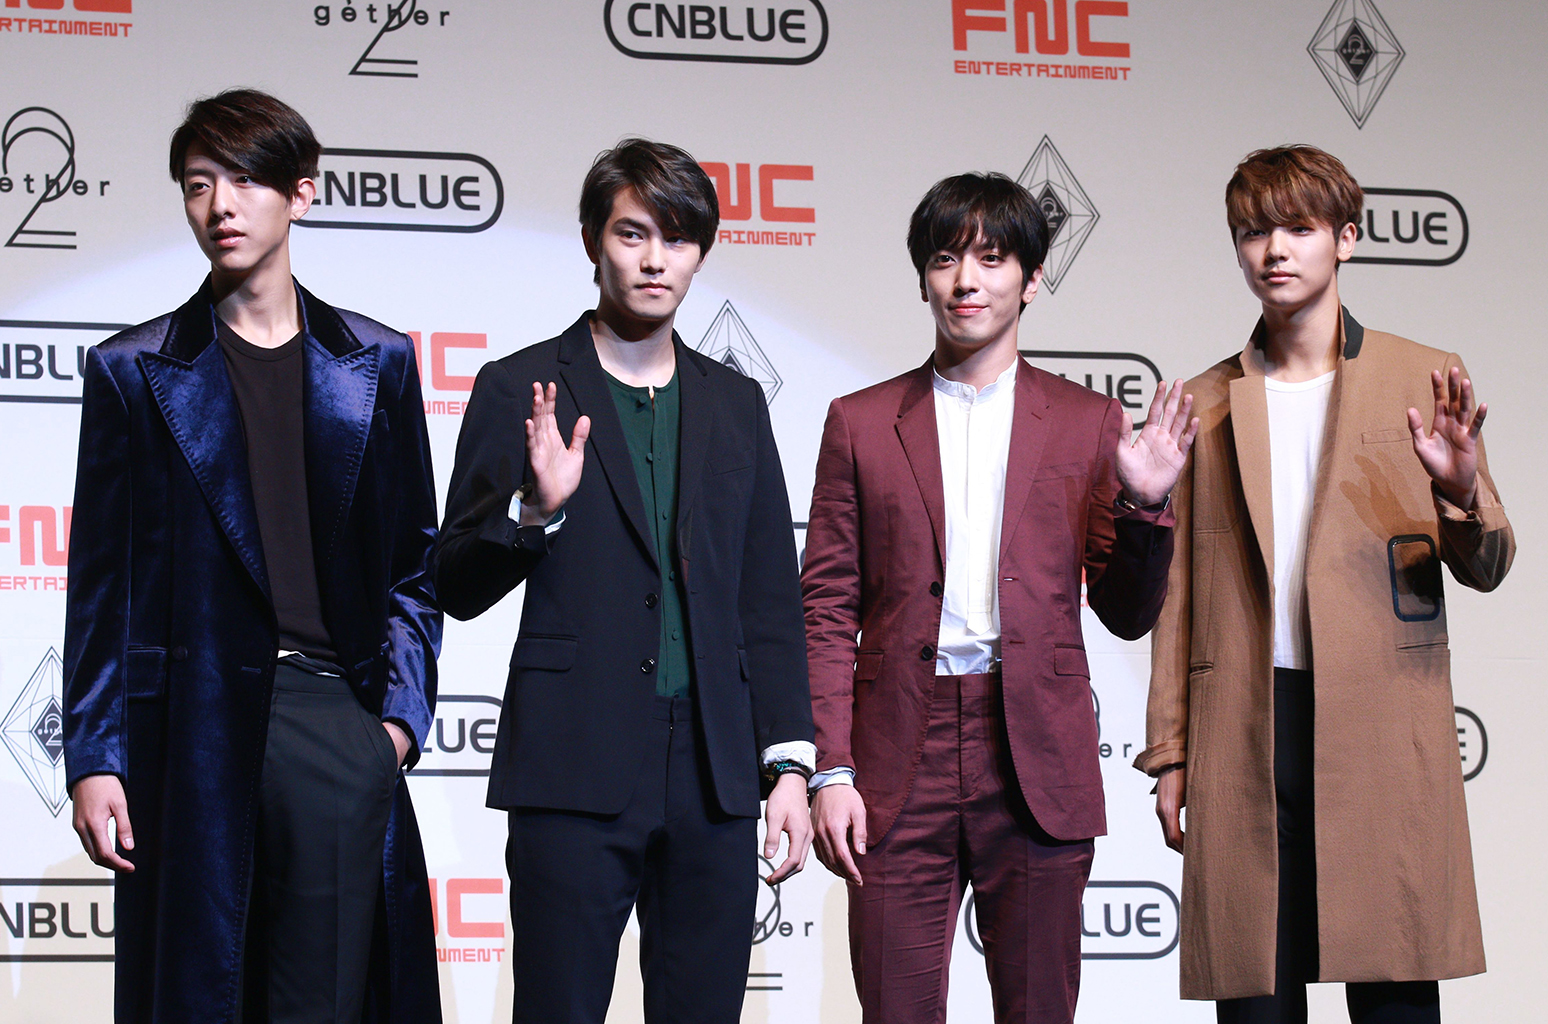 Images of CNBLUE | 1548x1024